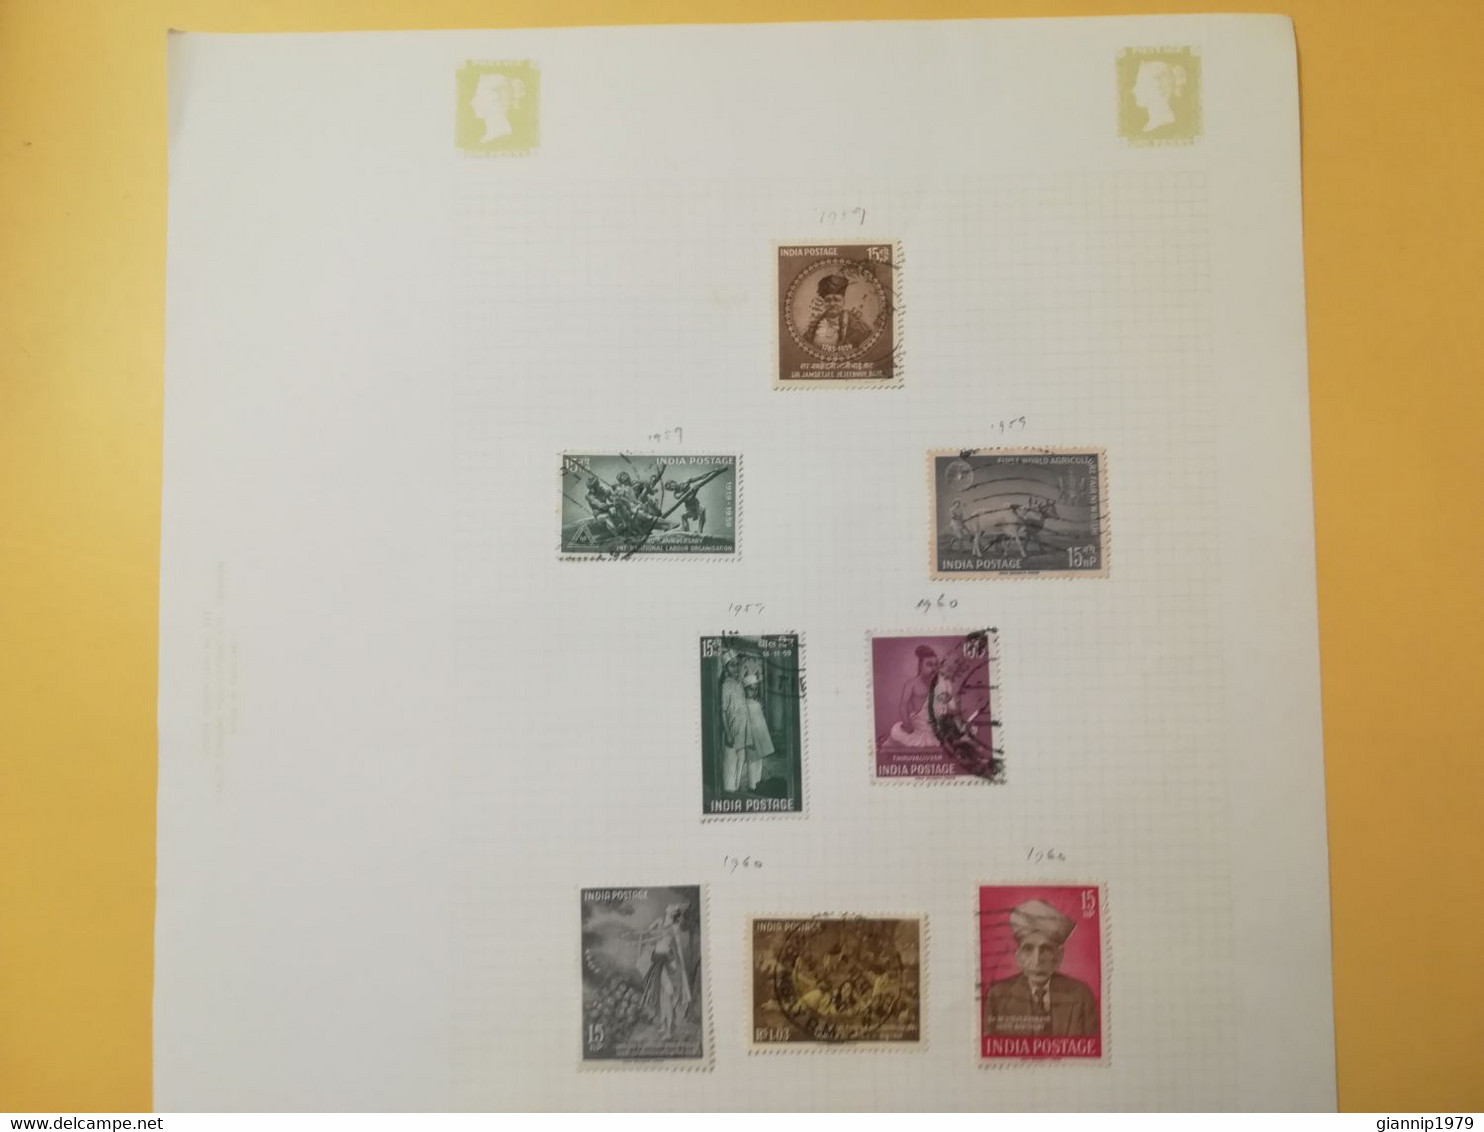 PAGINA PAGE ALBUM INDIA 1959 ATTACCATI PAGE WITH STAMPS COLLEZIONI LOTTO LOT LOTS - Collections, Lots & Séries